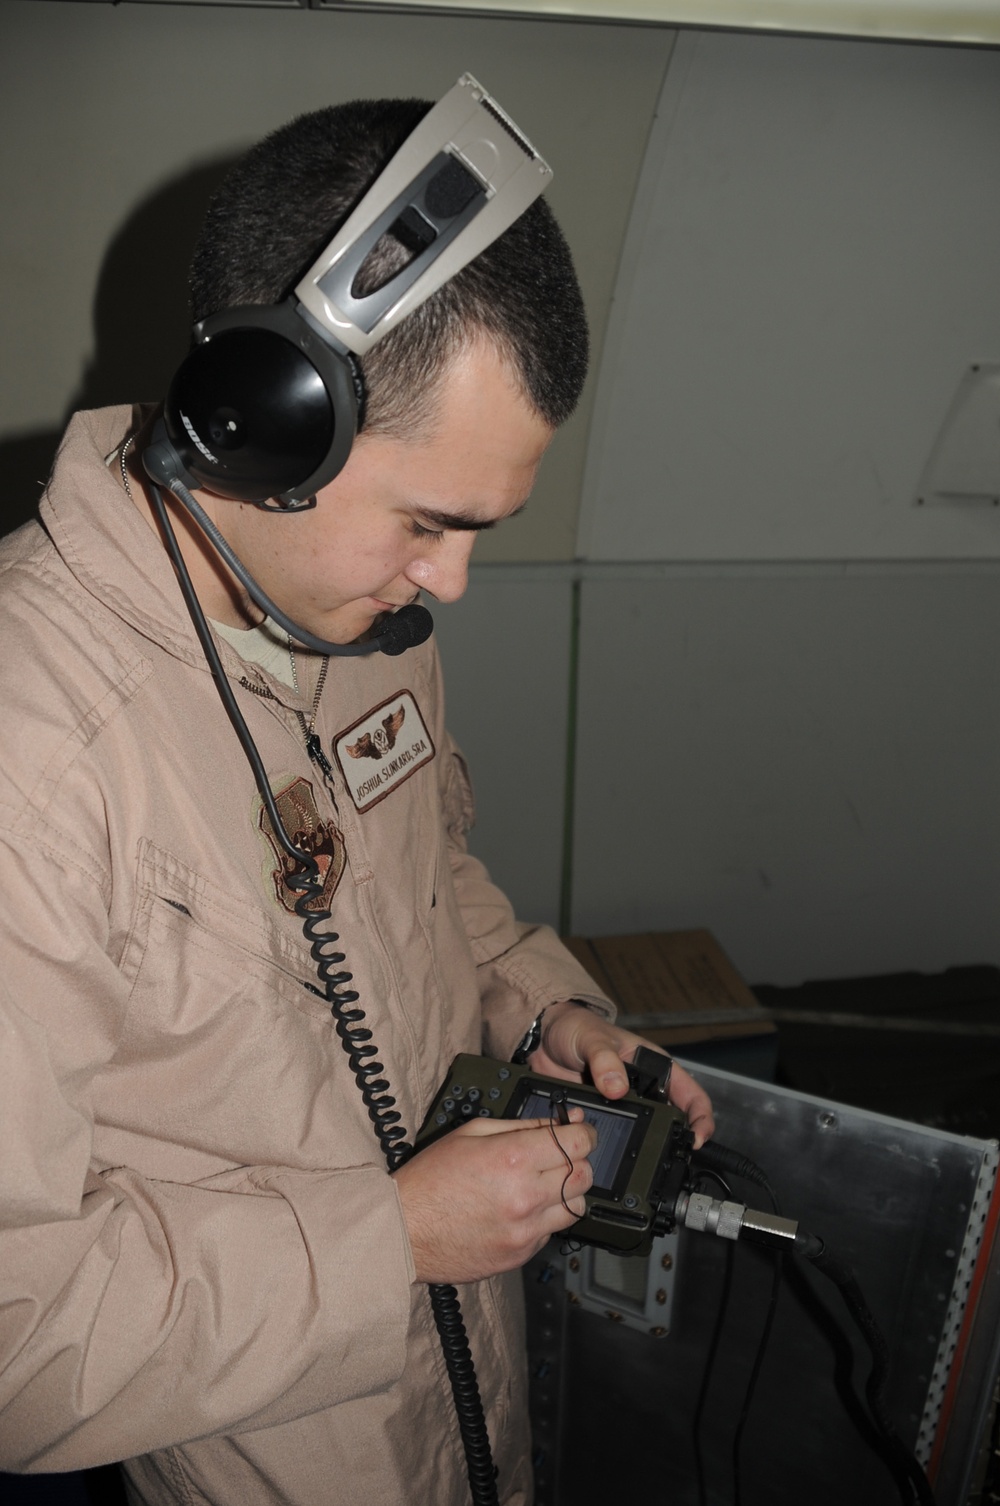 Tinker Senior Airman Performs a Systems Check on a Deployed Air Mission